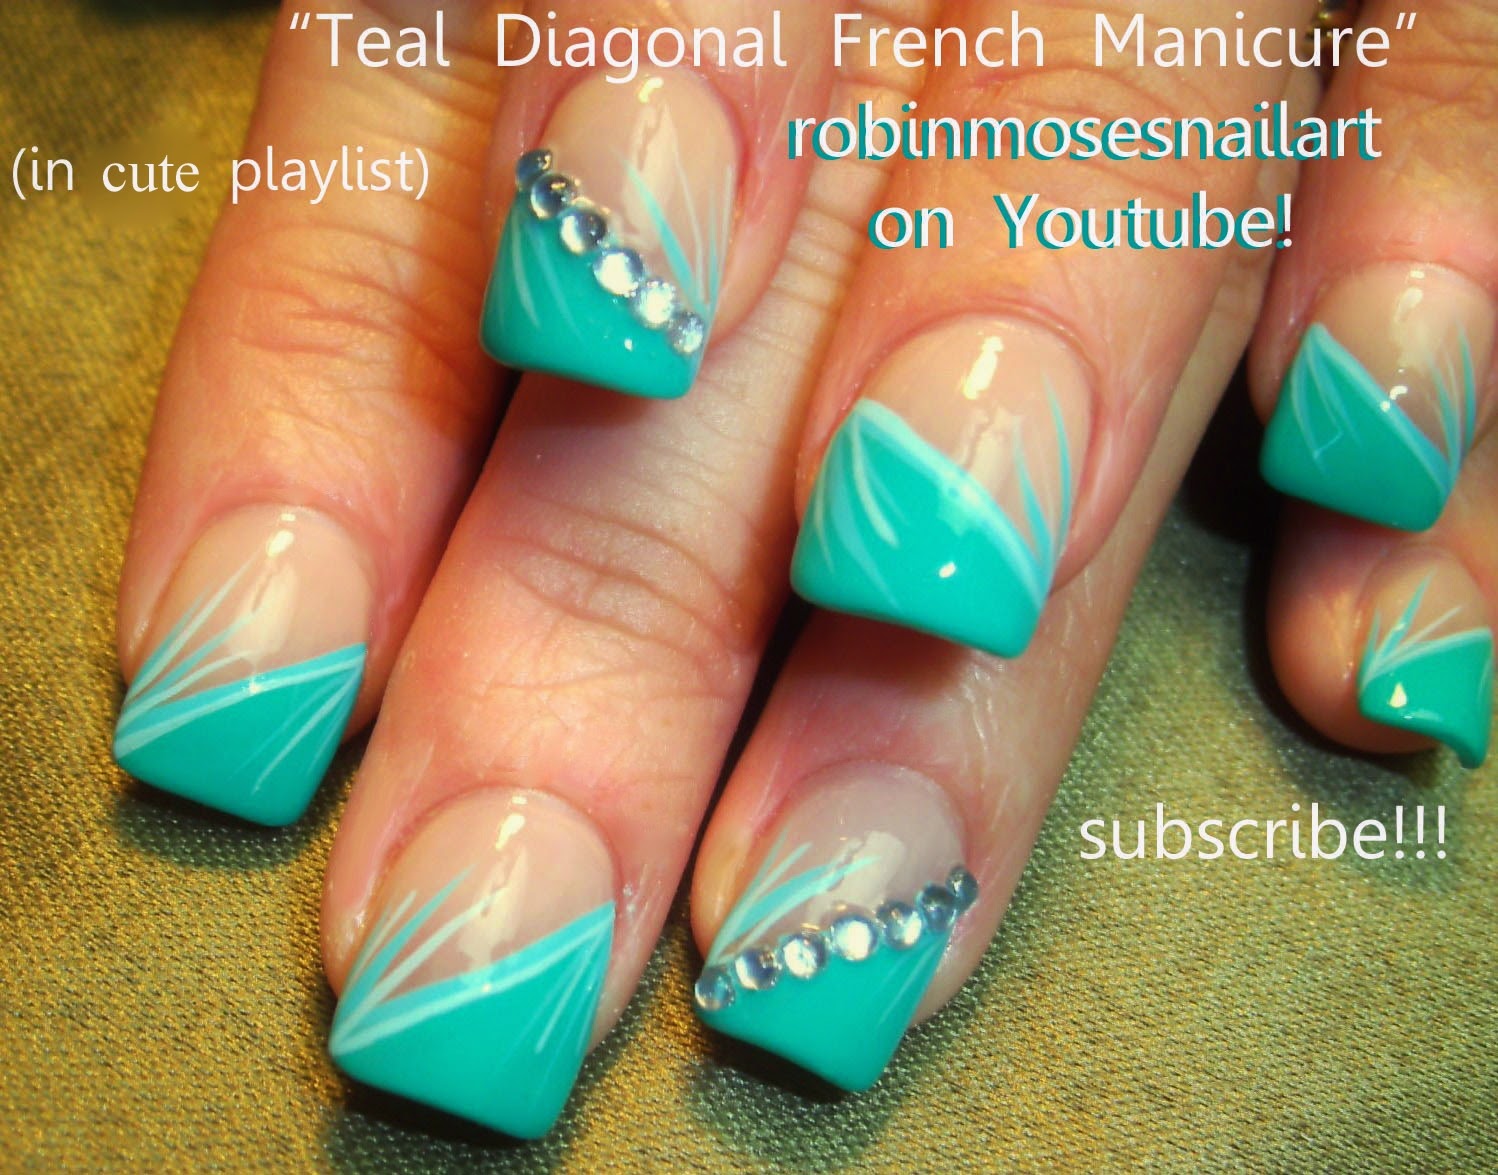 5. 20+ Teal Nail Designs for a Chic and Trendy Look - wide 3